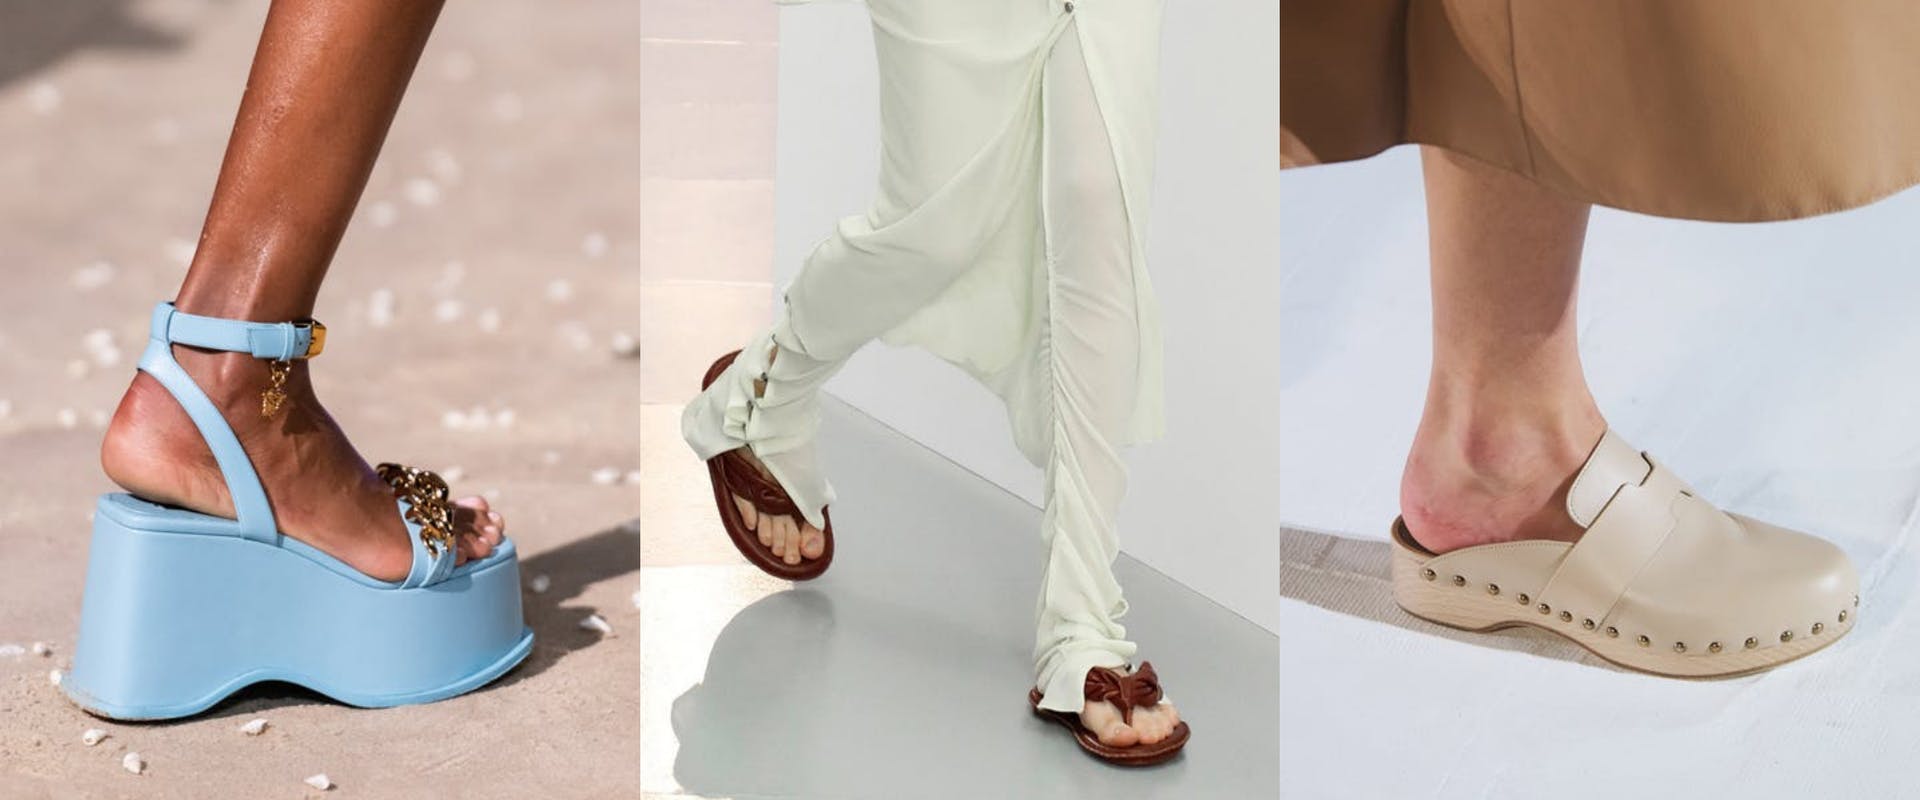 These 9 Spring/Summer 2021 Shoe Trends Will Dominate This Year